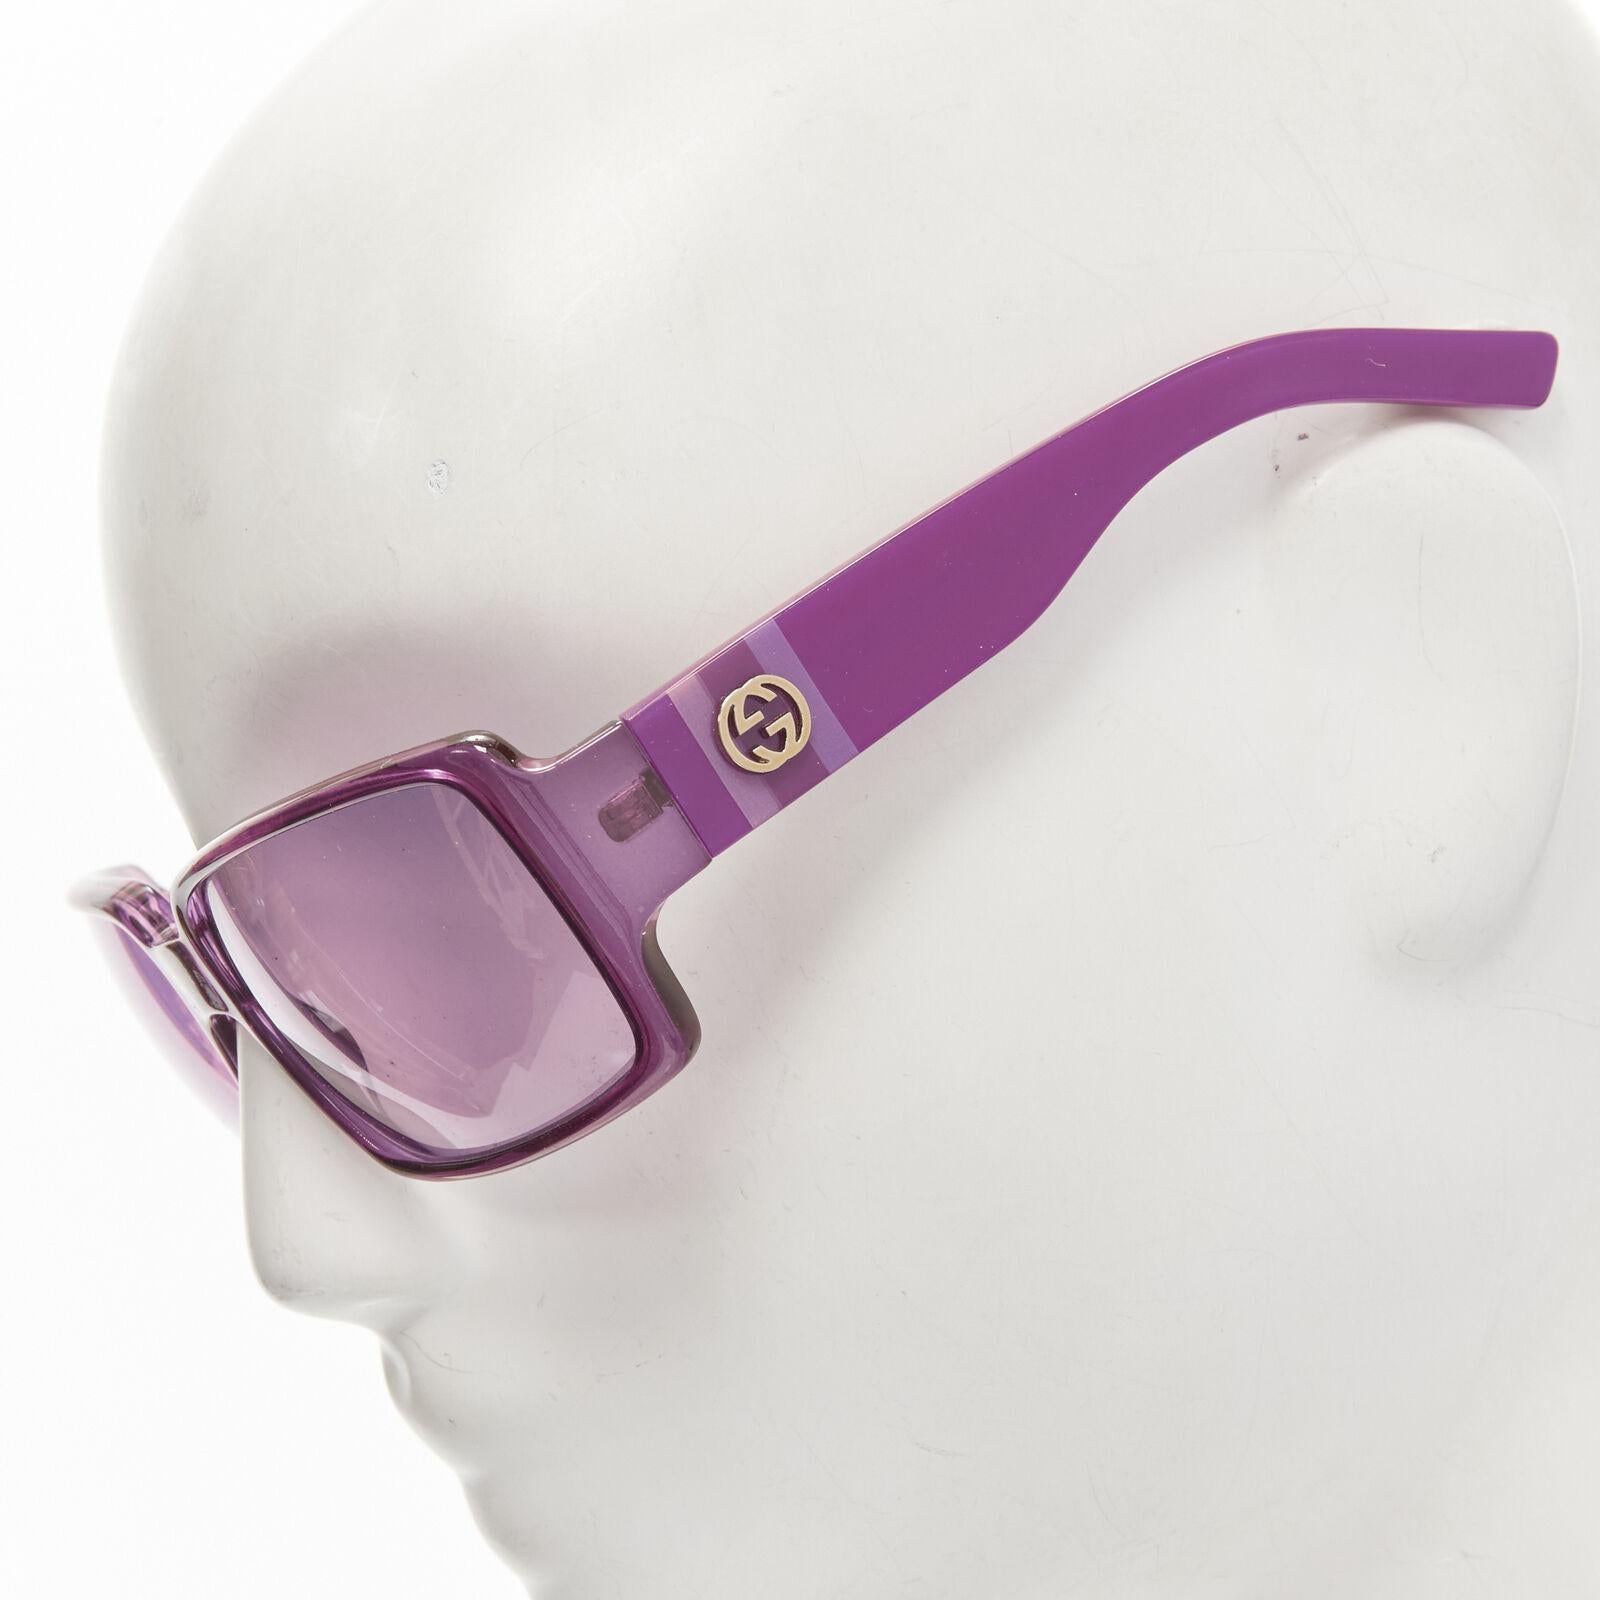 GUCCI Vintage Y2K GG2563/S PR3 pink square shield GG logo webbing sunglasses
Reference: ANWU/A00849
Brand: Gucci
Model: GG2563/S PR3
Material: Plastic
Color: Pink
Pattern: Solid
Extra Details: GG logo and web details at the arms.
Made in: